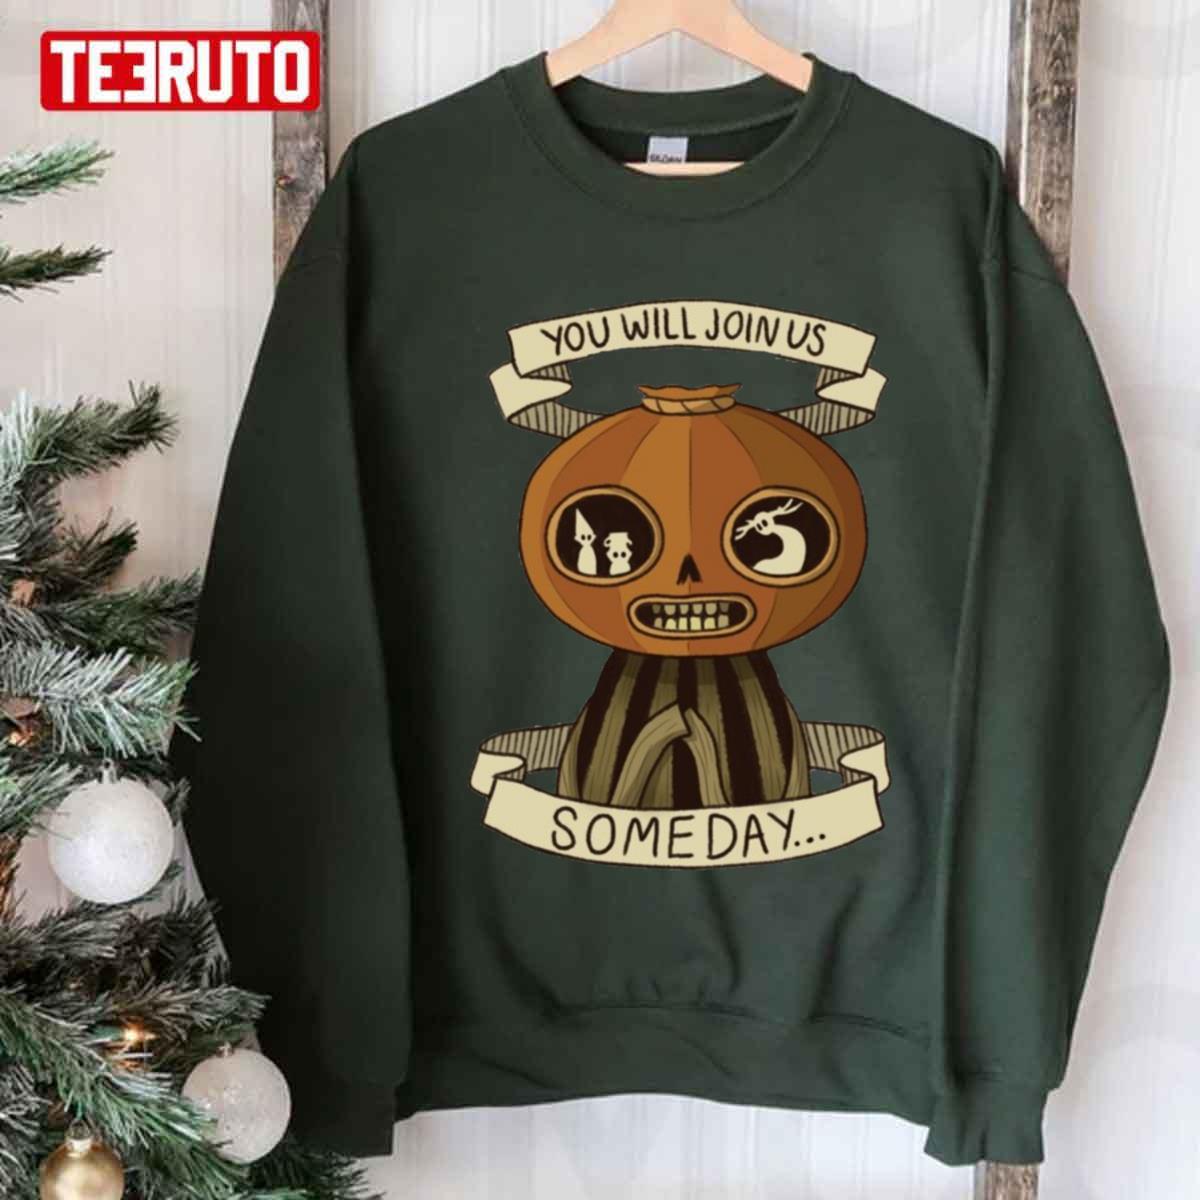 FREE shipping You Will Join Us Someday Over the Garden Wall shirt